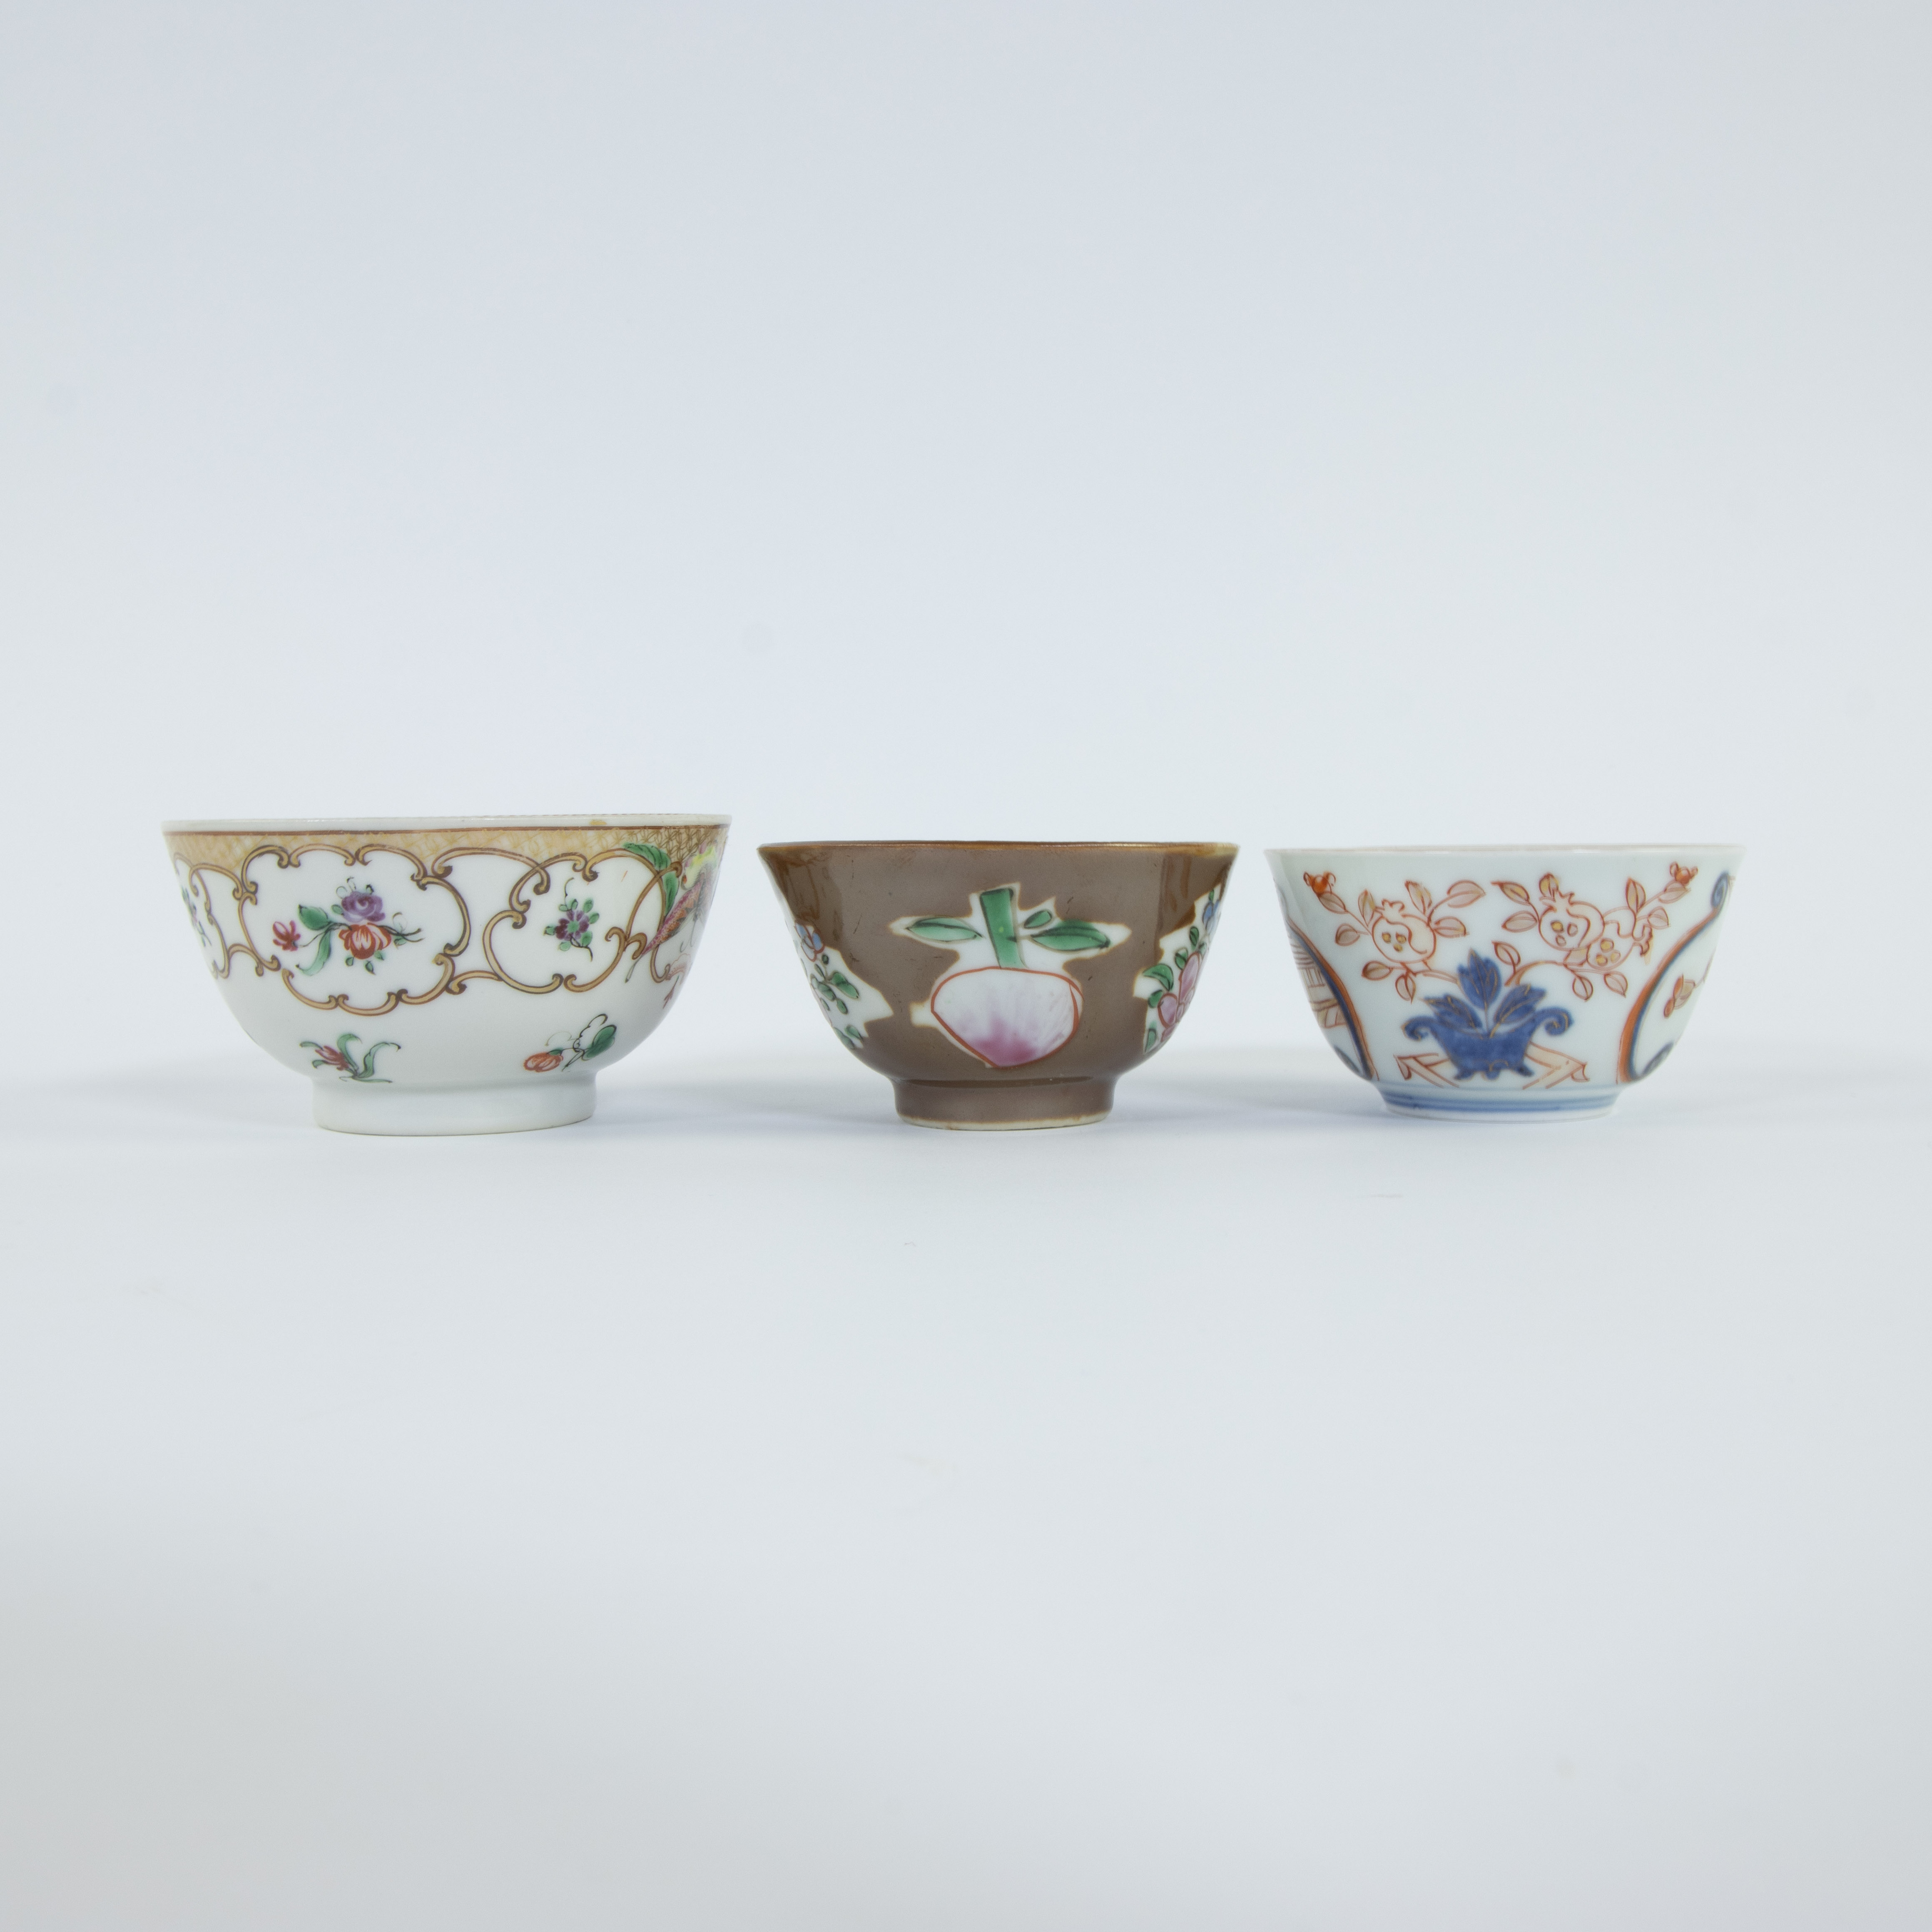 Collection of Chinese porcelain 18th/19th century, famille rose, Imari - Image 8 of 10